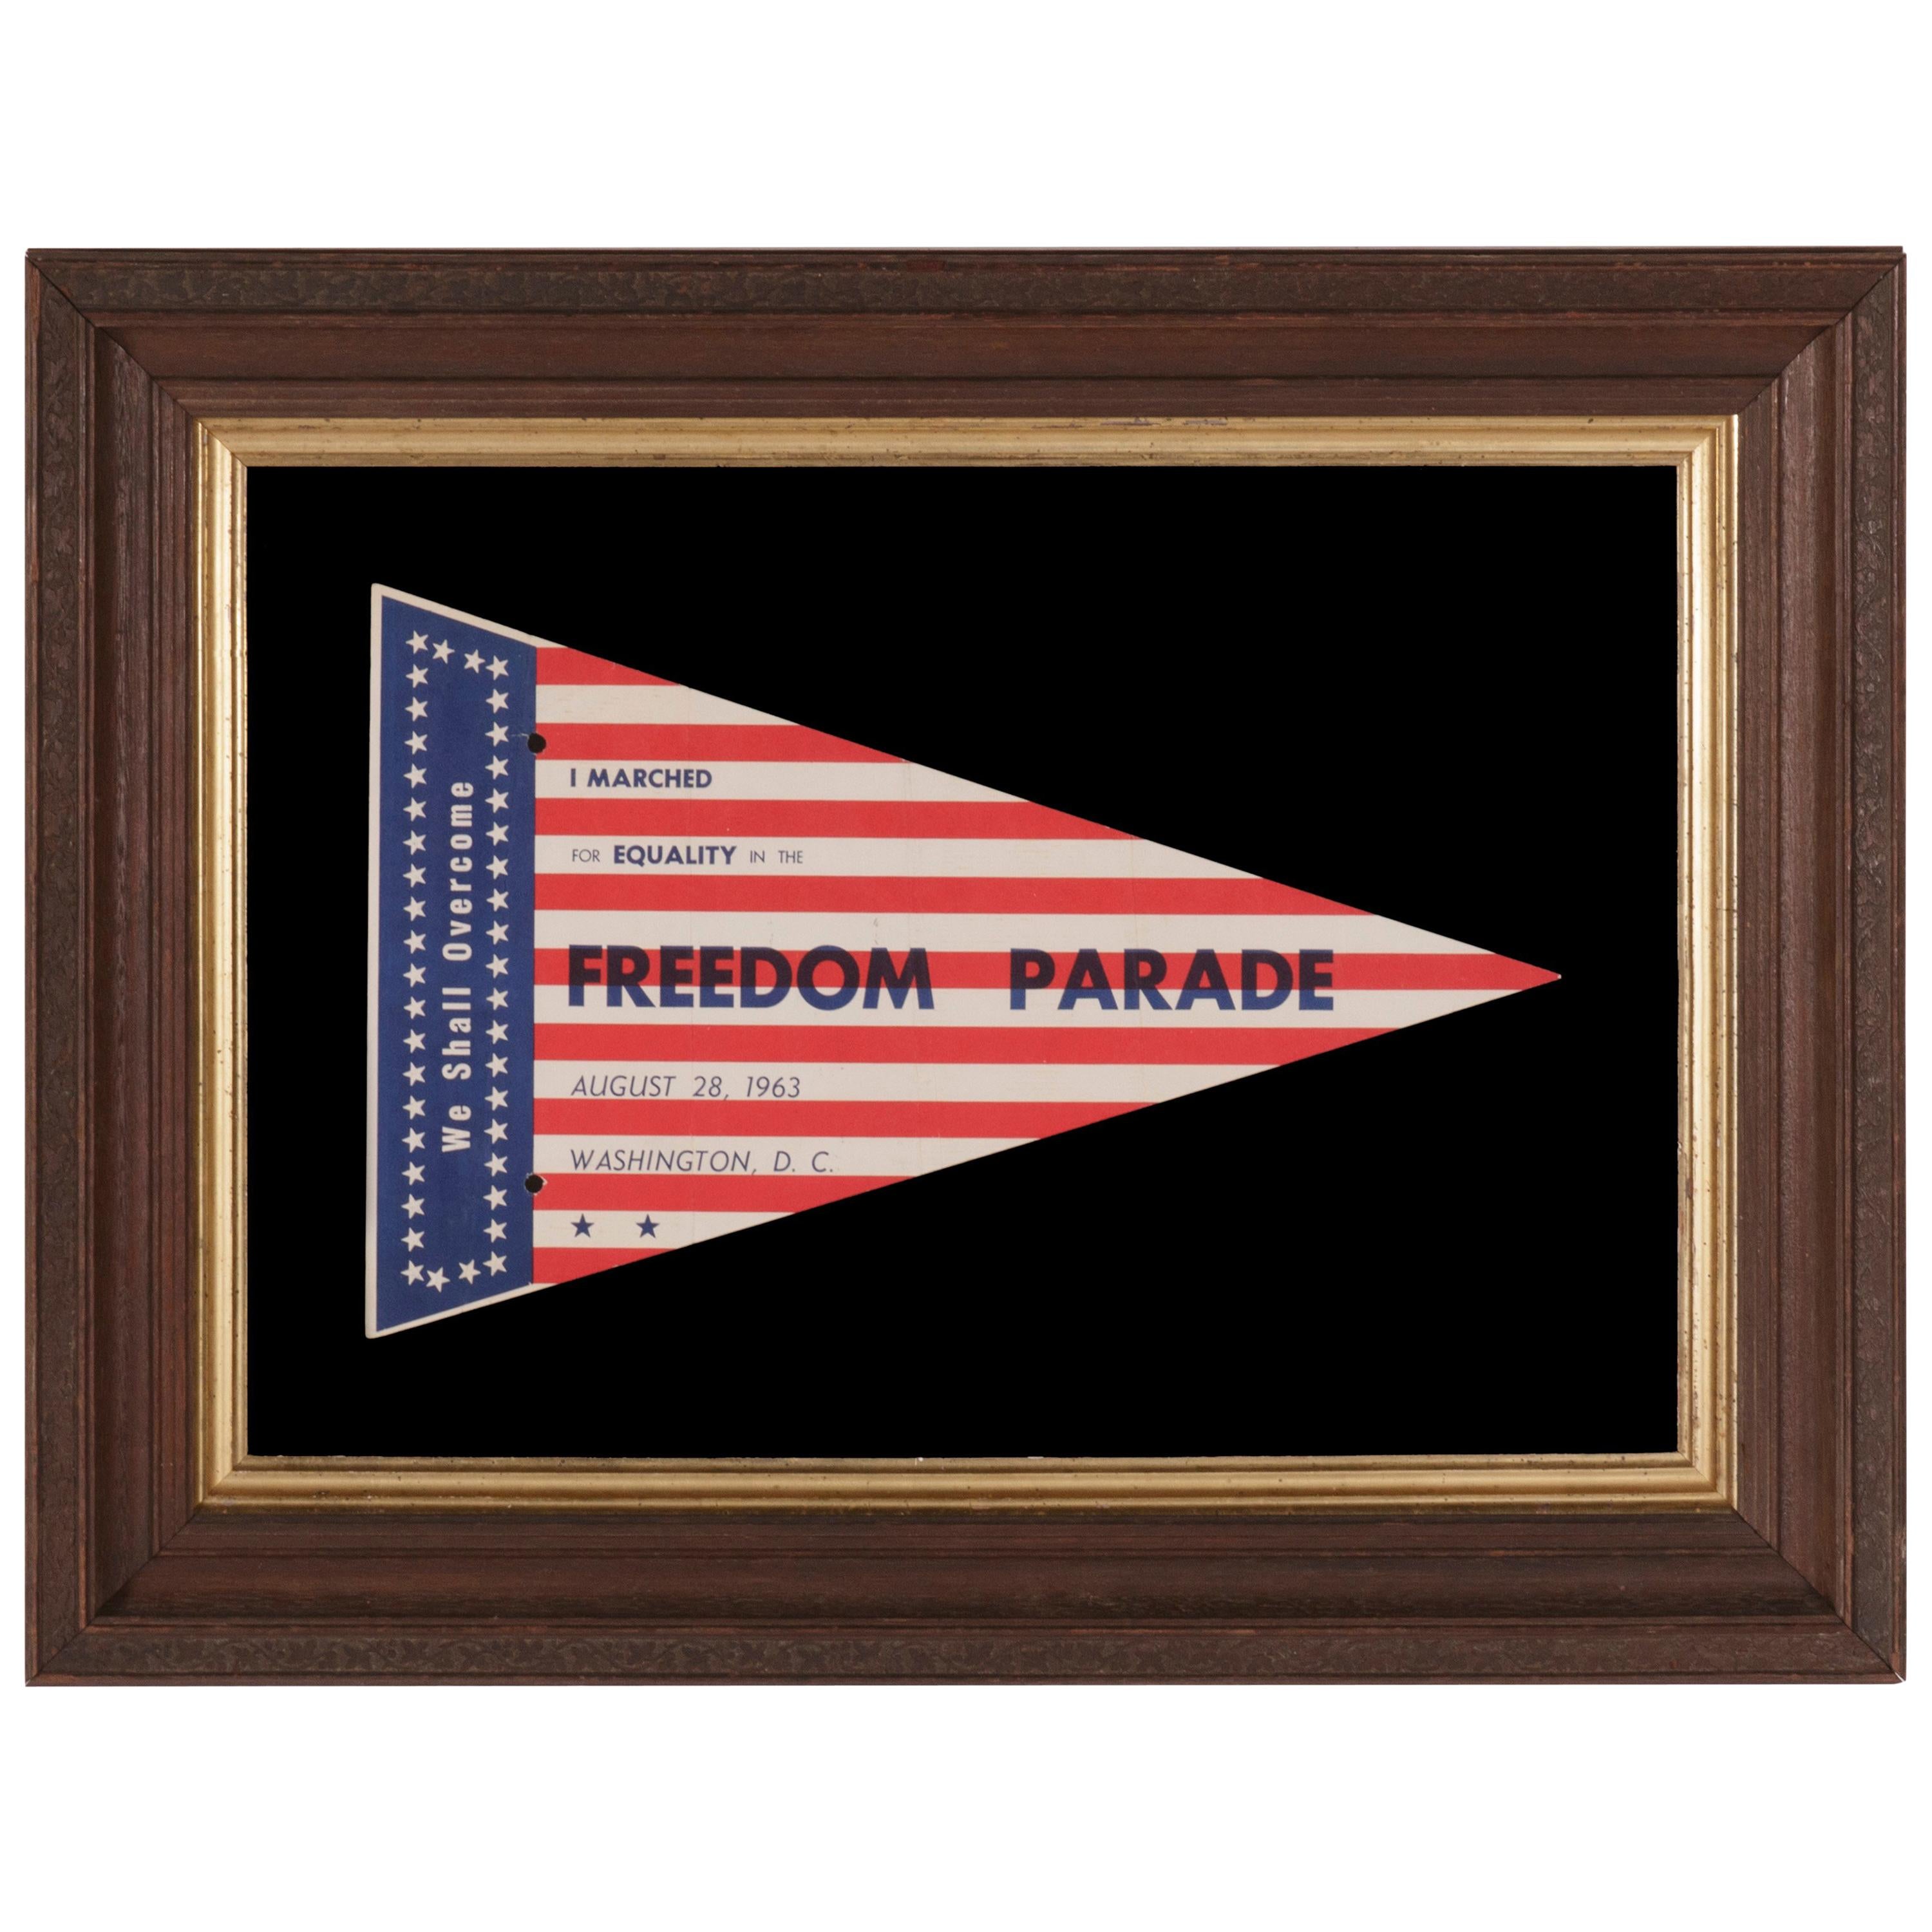 Extraordinary Star & Stripes Pennant from the March on Washington 